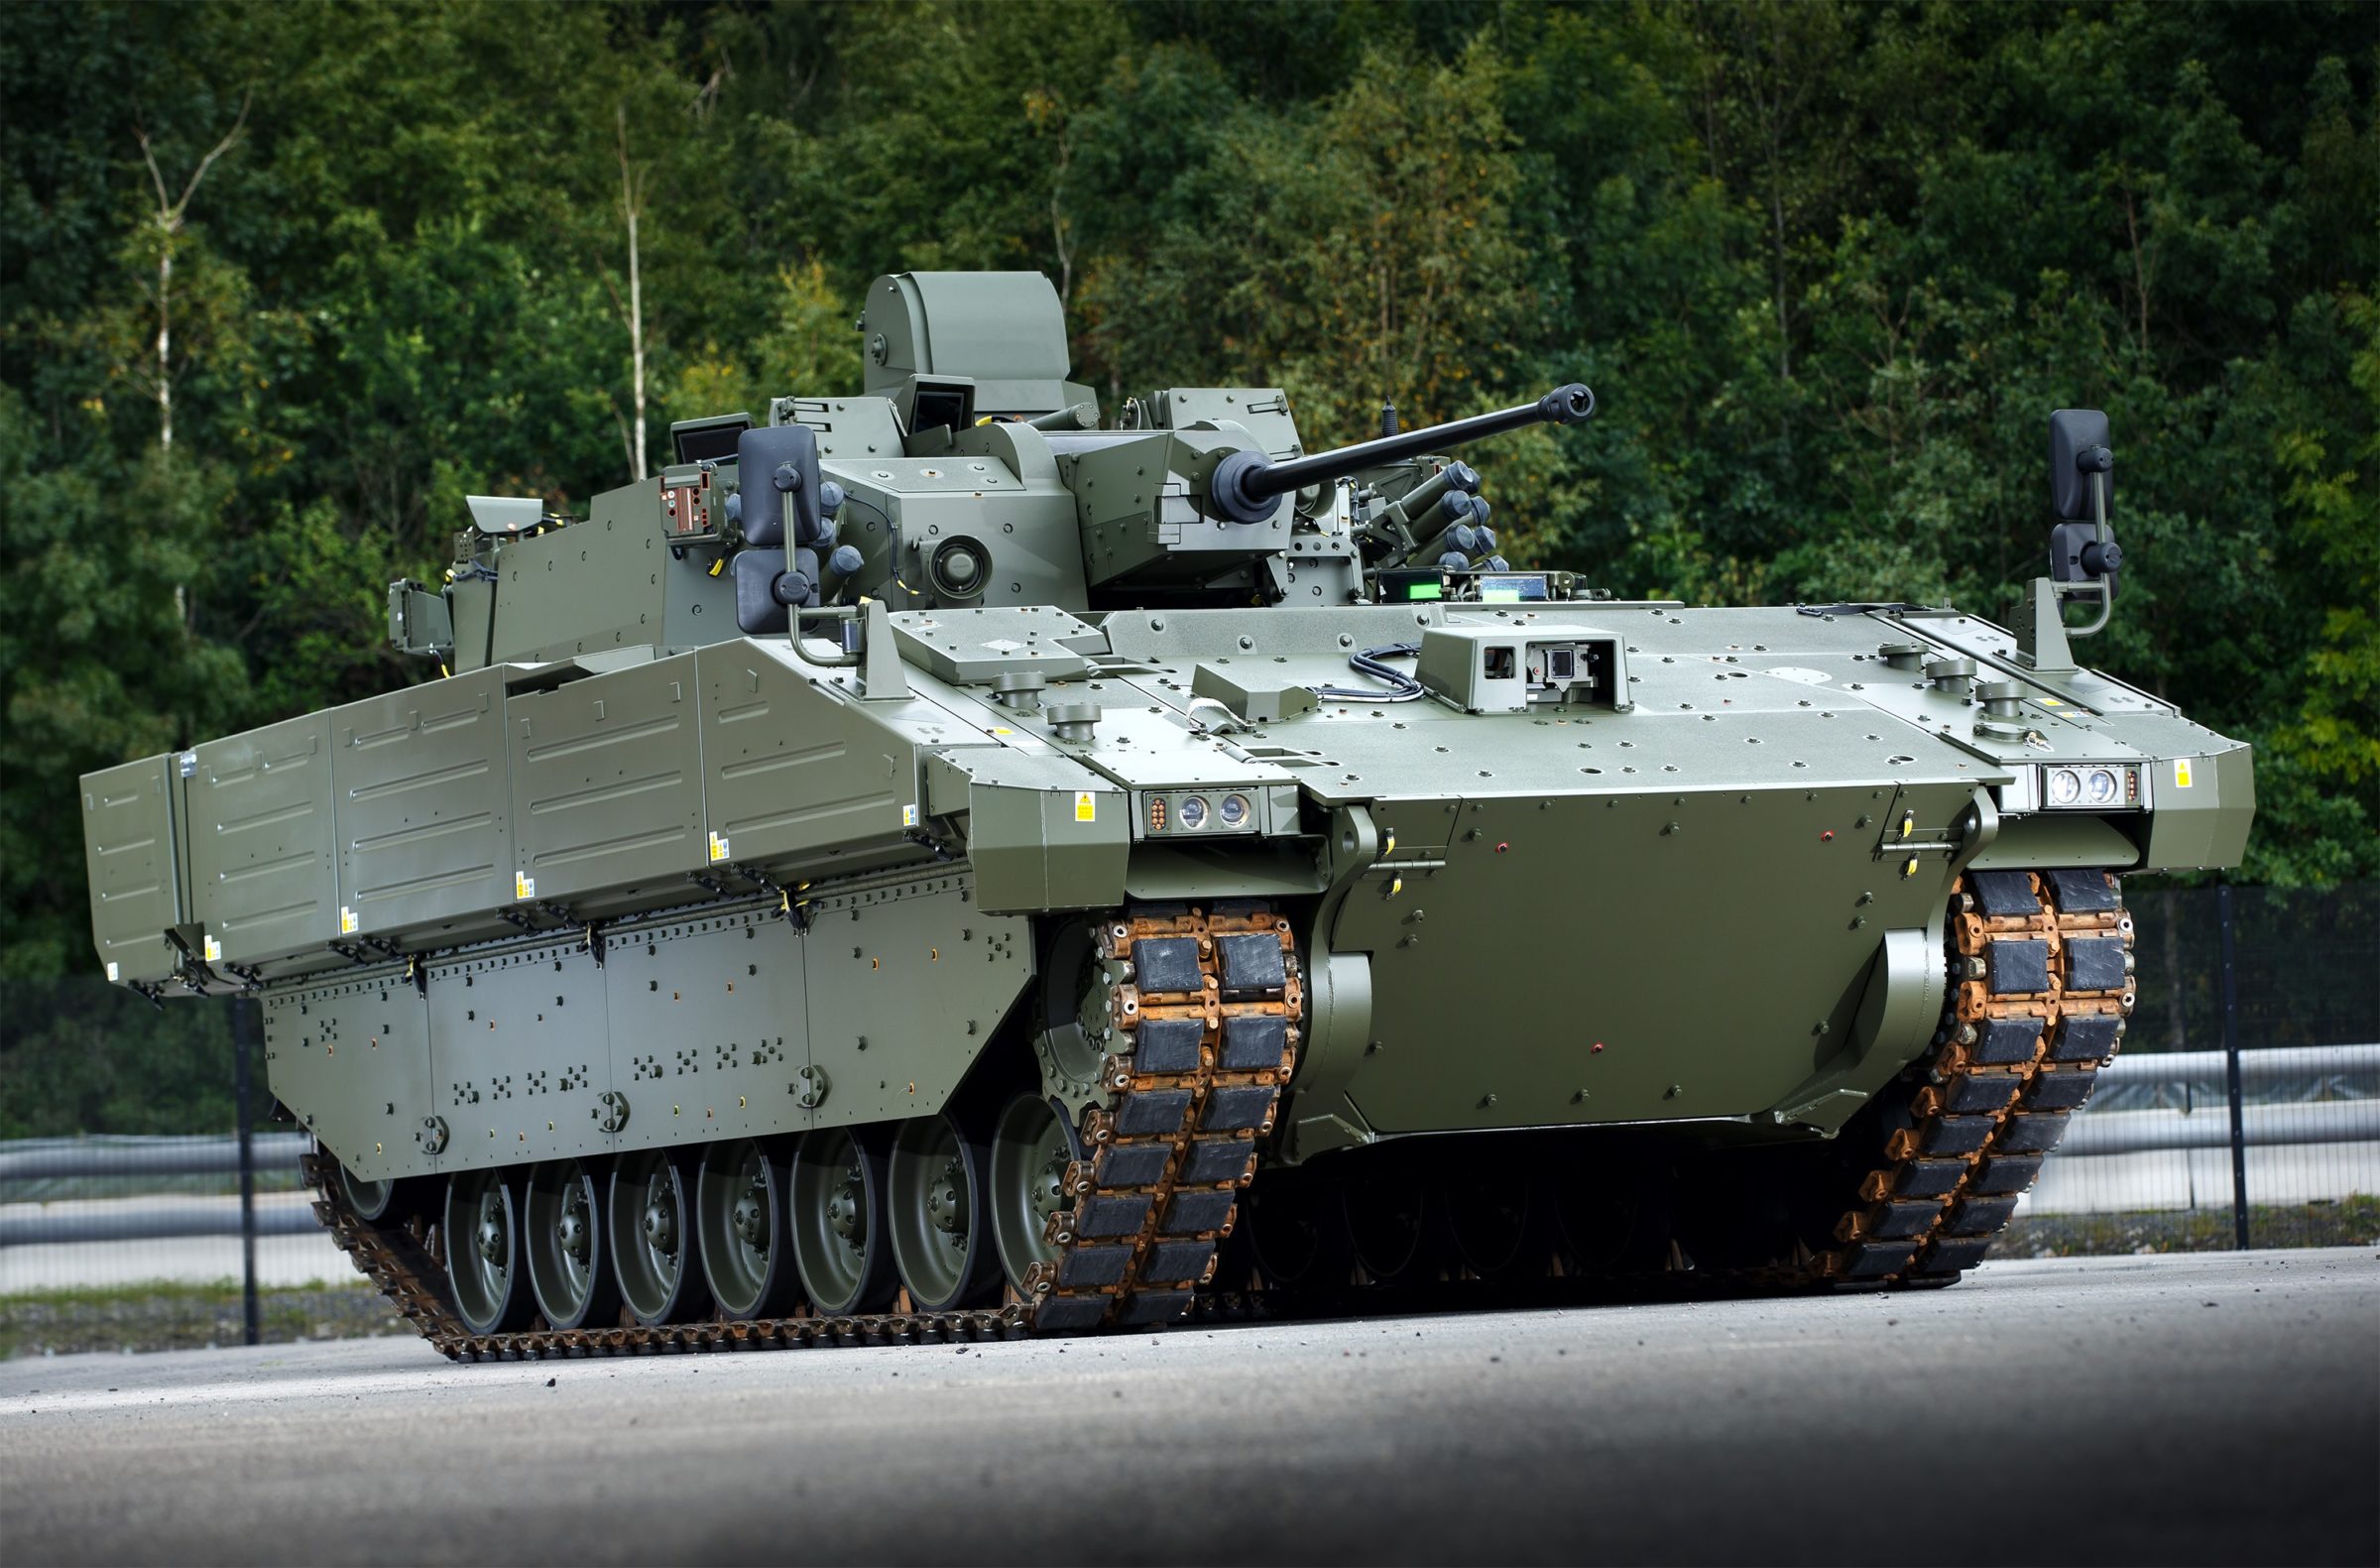 The-AJAX-reconnaissance-vehicle-will-soon-enter-service-with-the-British-e1581077487156.jpg